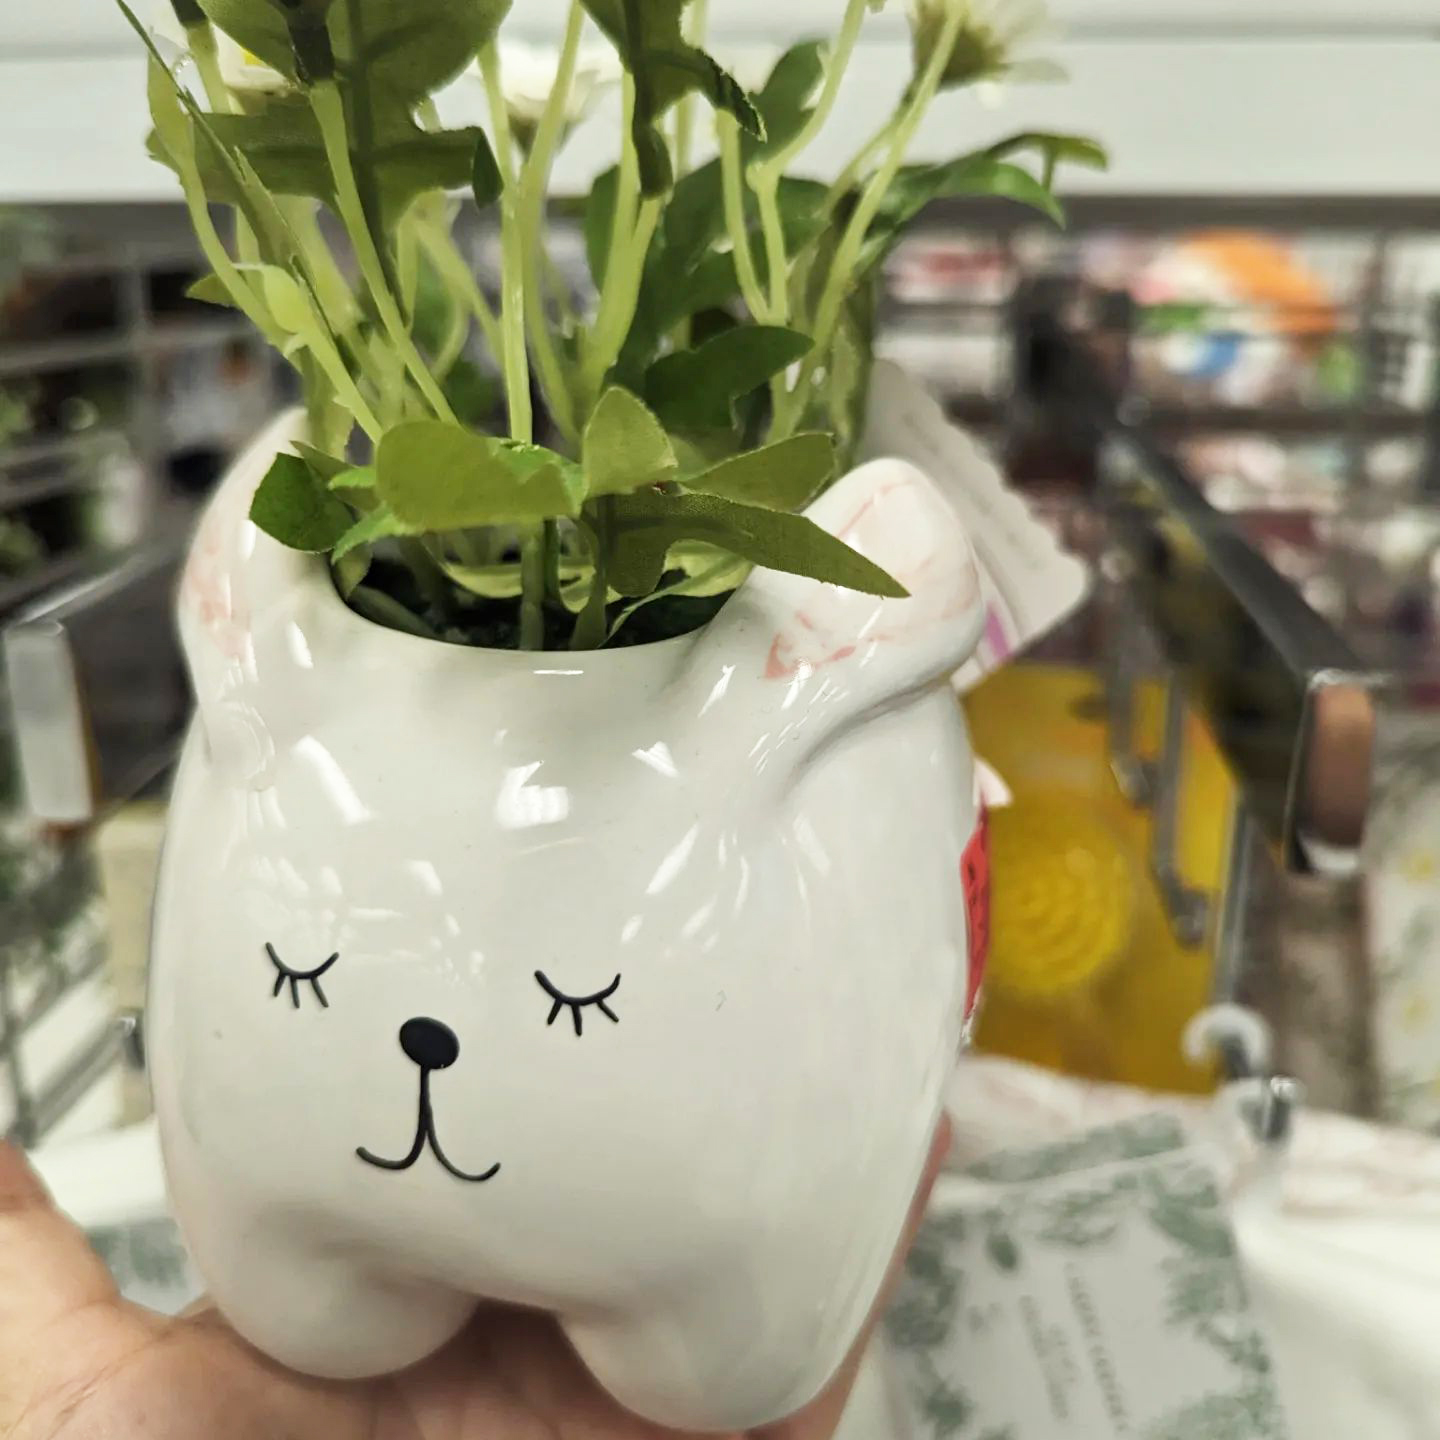 Affordable and cute ceramic Easter bunny planter from a Ross store